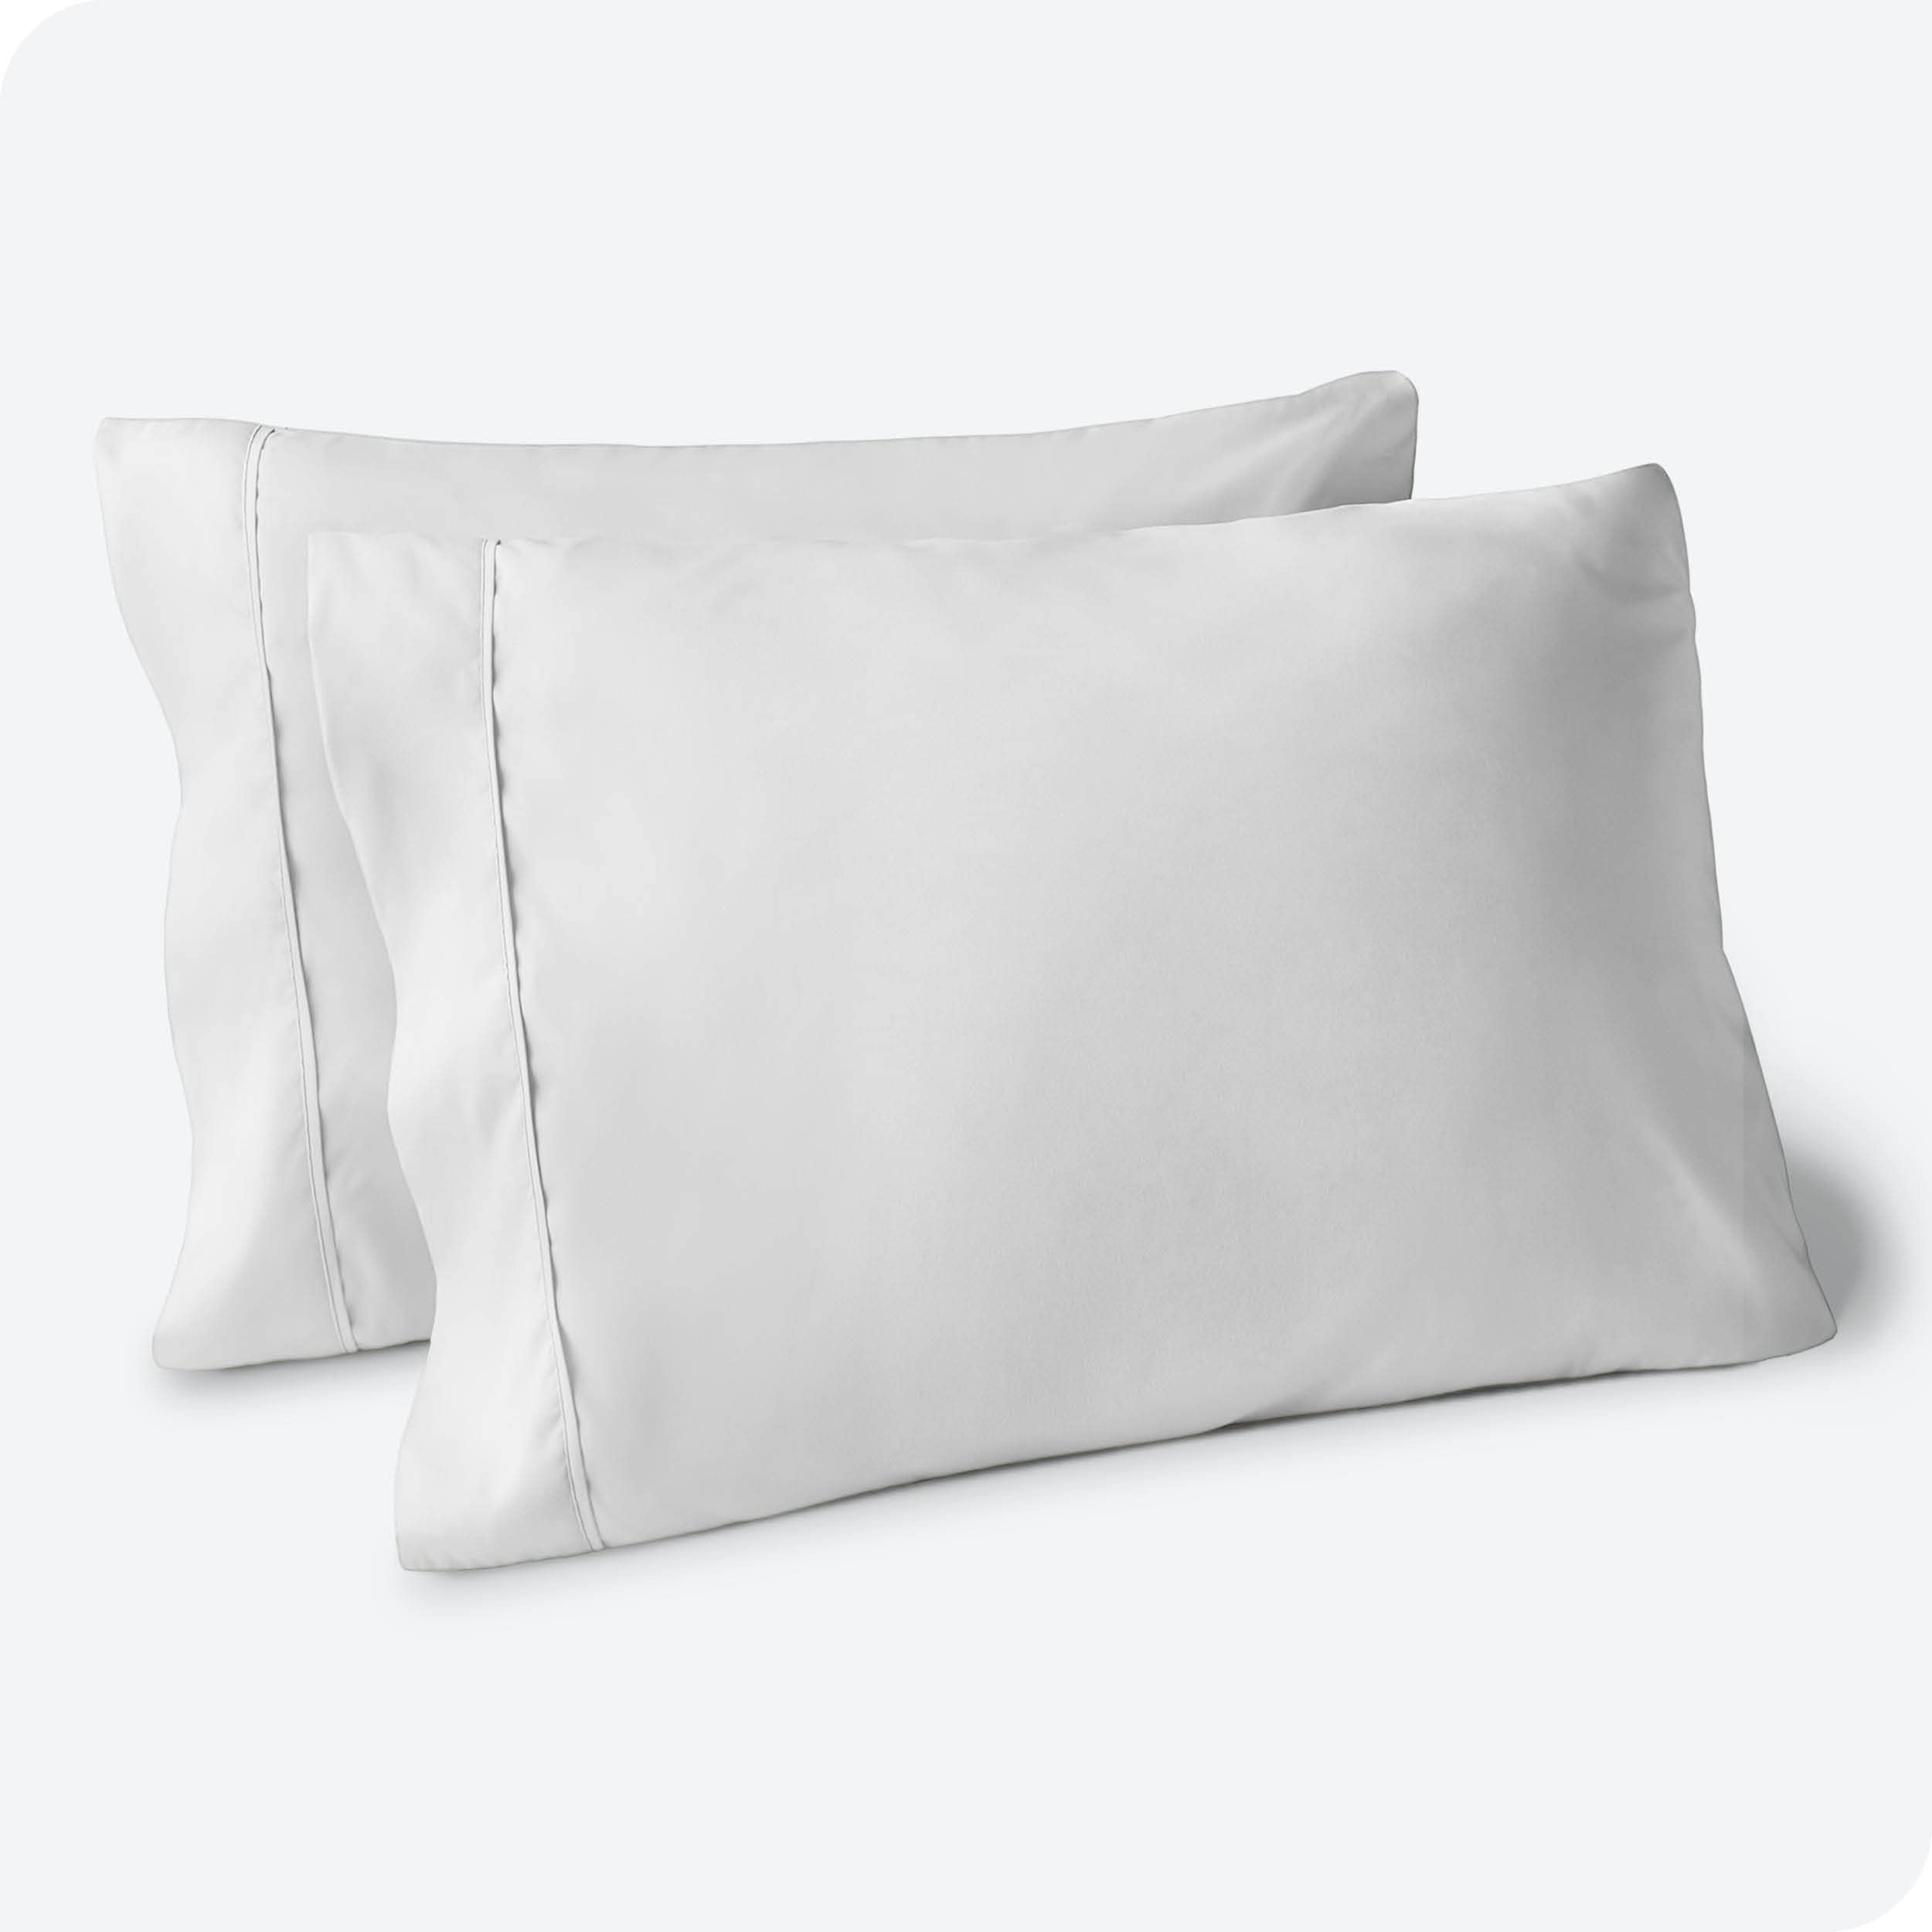 Book Cover Bare Home Microfiber Pillow Cases - King Size Set of 2 - Cooling Pillowcases - Double Brushed - White Pillowcases 2 Pack - Easy Care (King Pillowcase Set of 2, White)